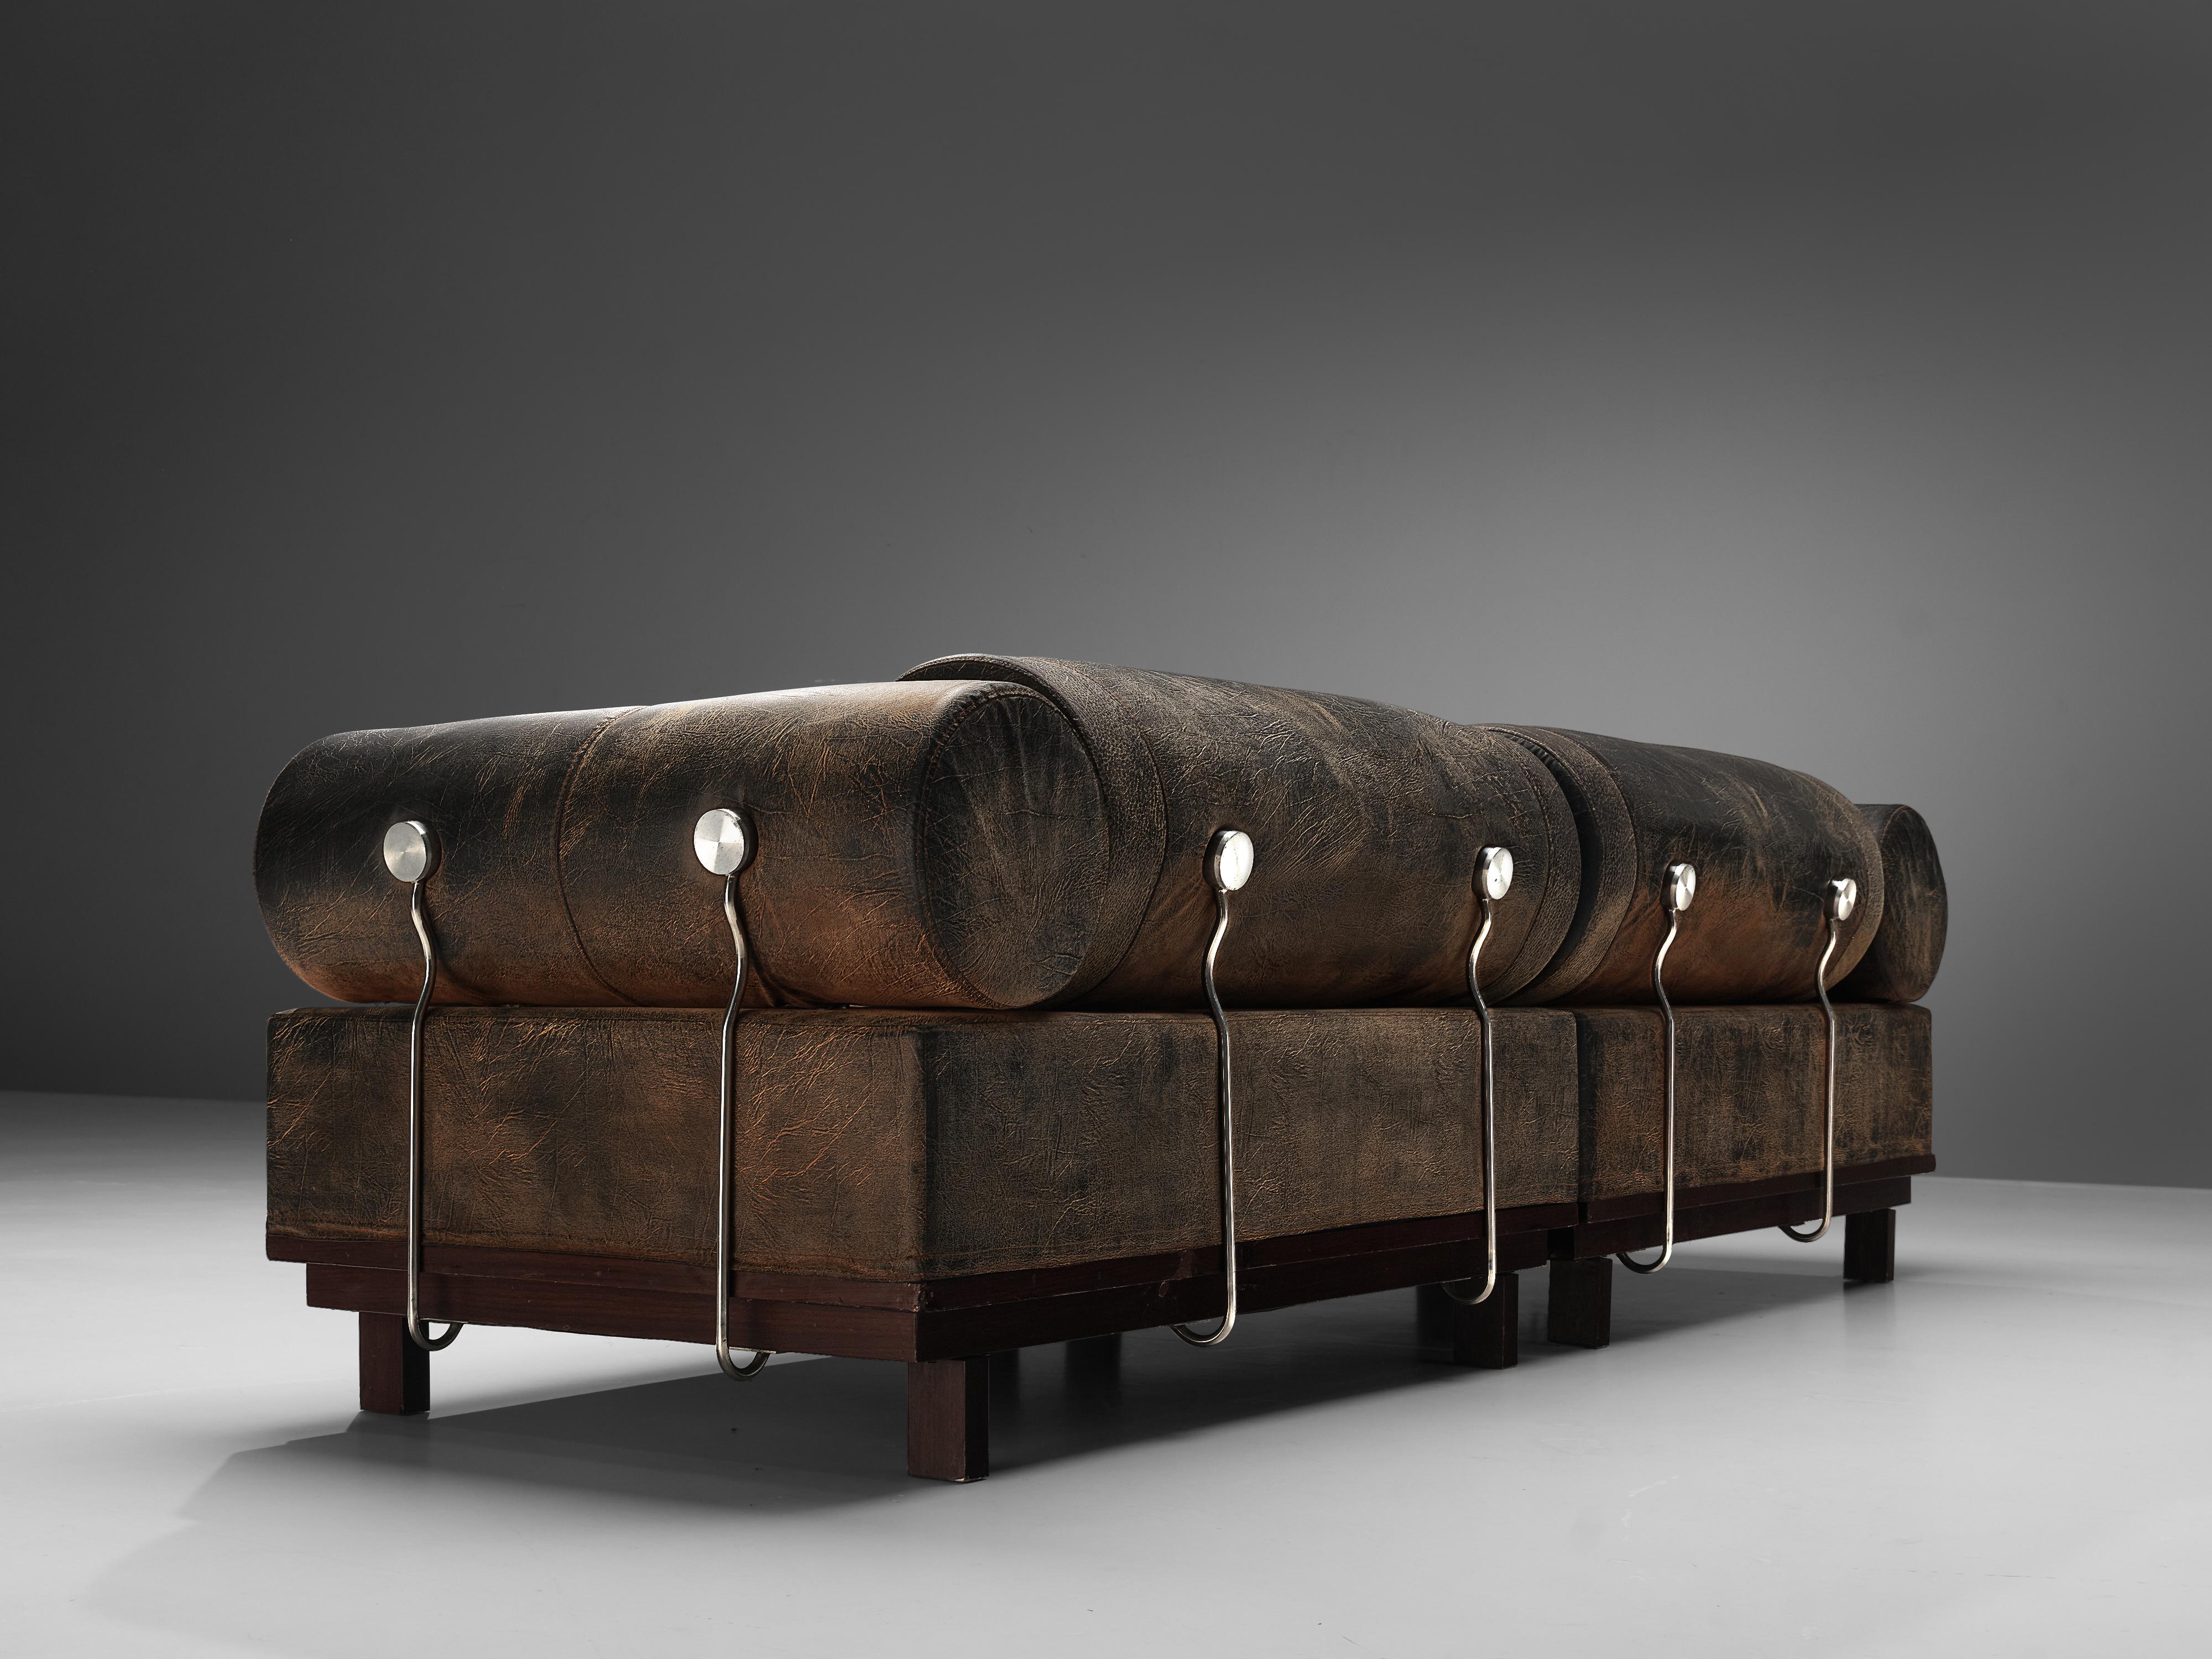 Bulky Modular Sofa in Leatherette and Metal Details 3